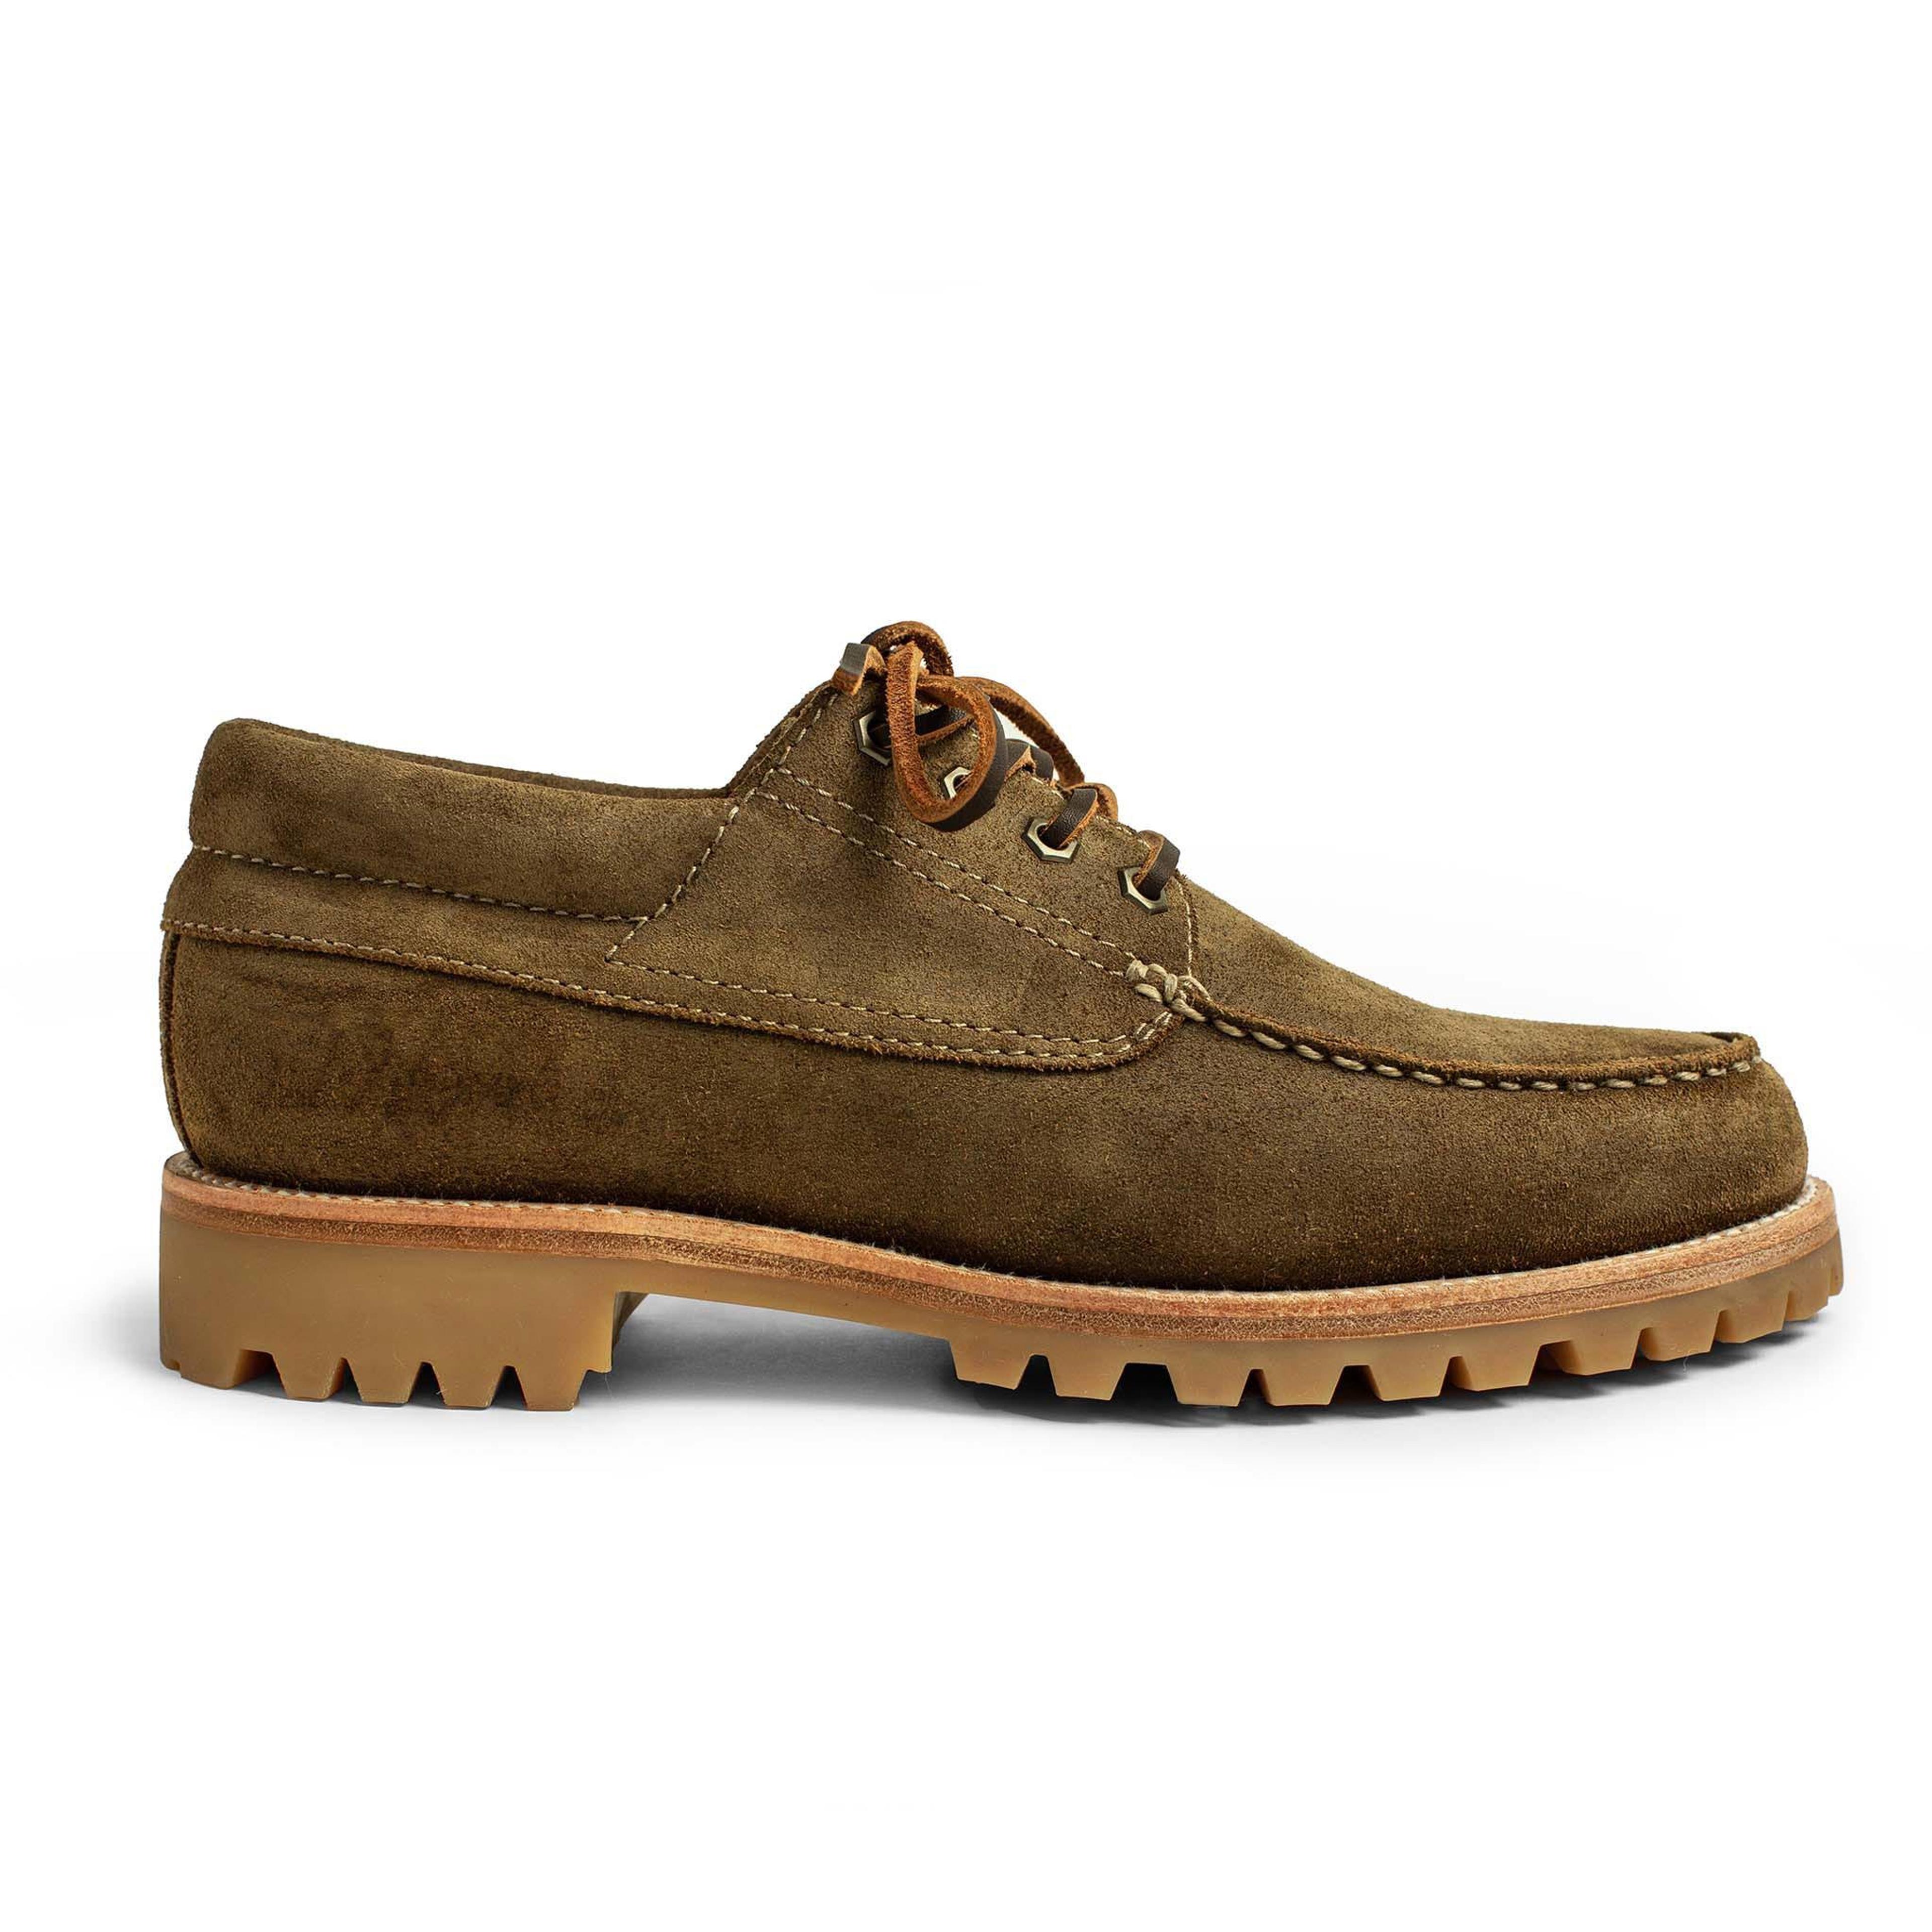 The Ridge Moc in Golden Brown Waxed Suede | Taylor Stitch